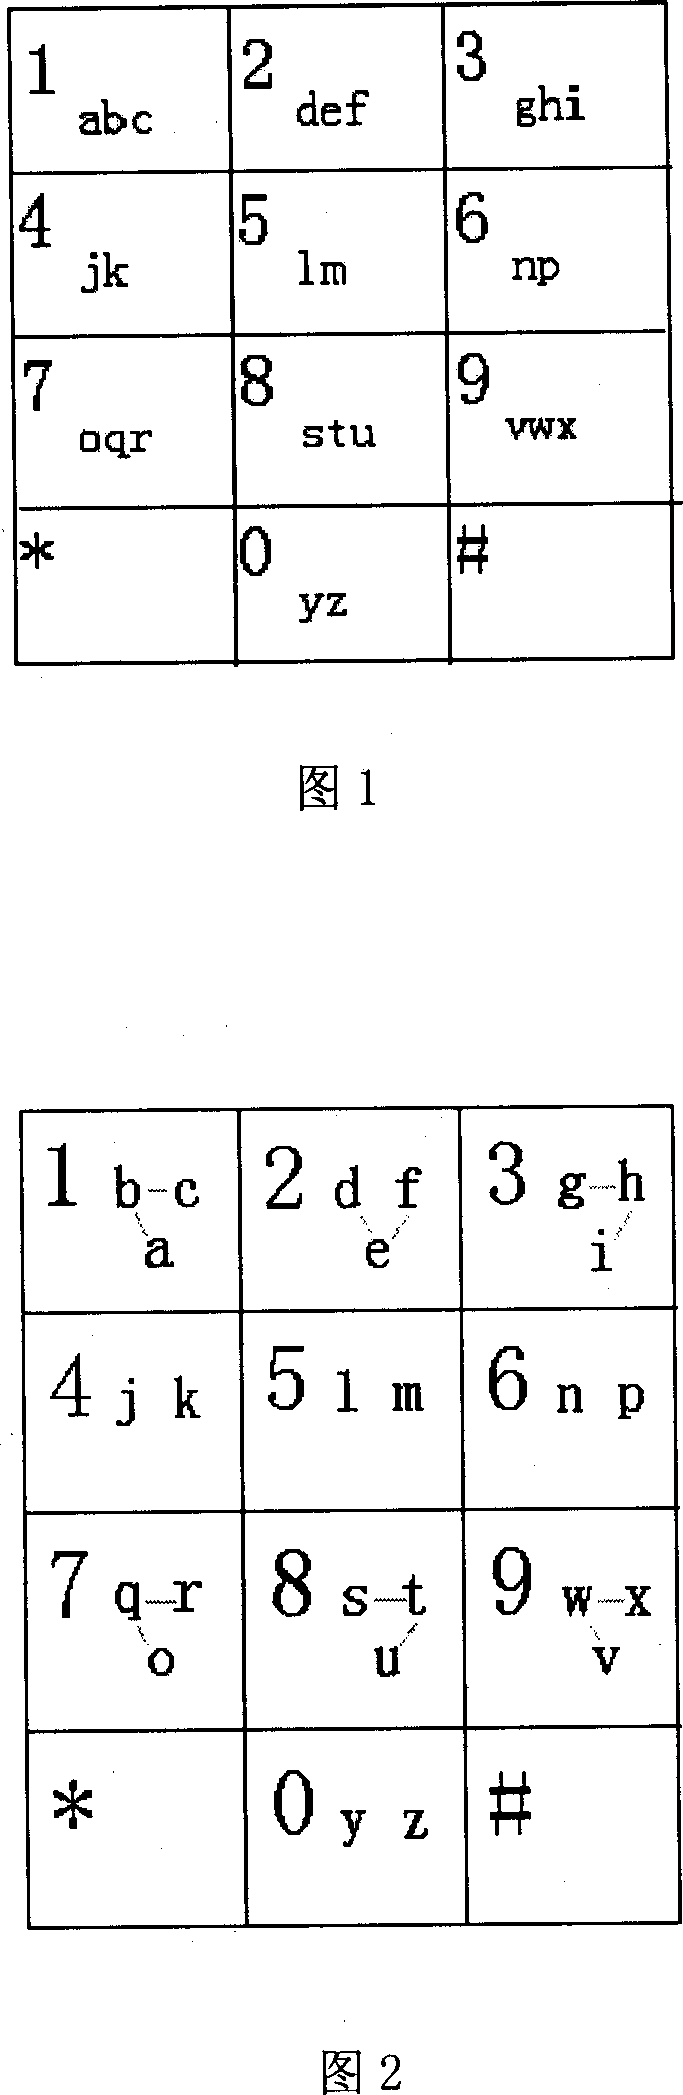 Numerical keyboard Chinese input method with 10 key places